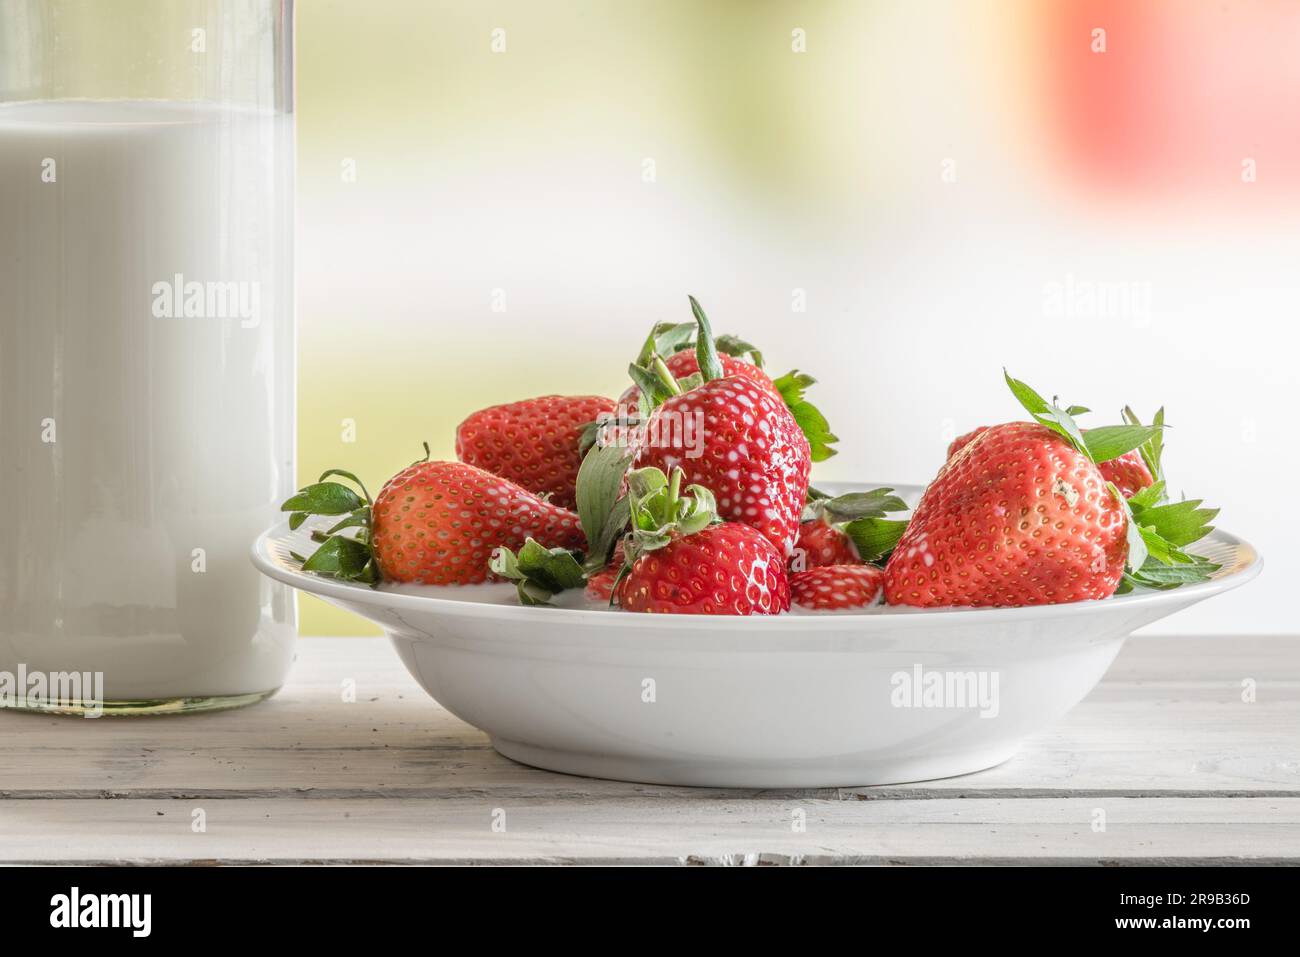 Strawberries on a plate with a bottle of milk on a table Stock Photo